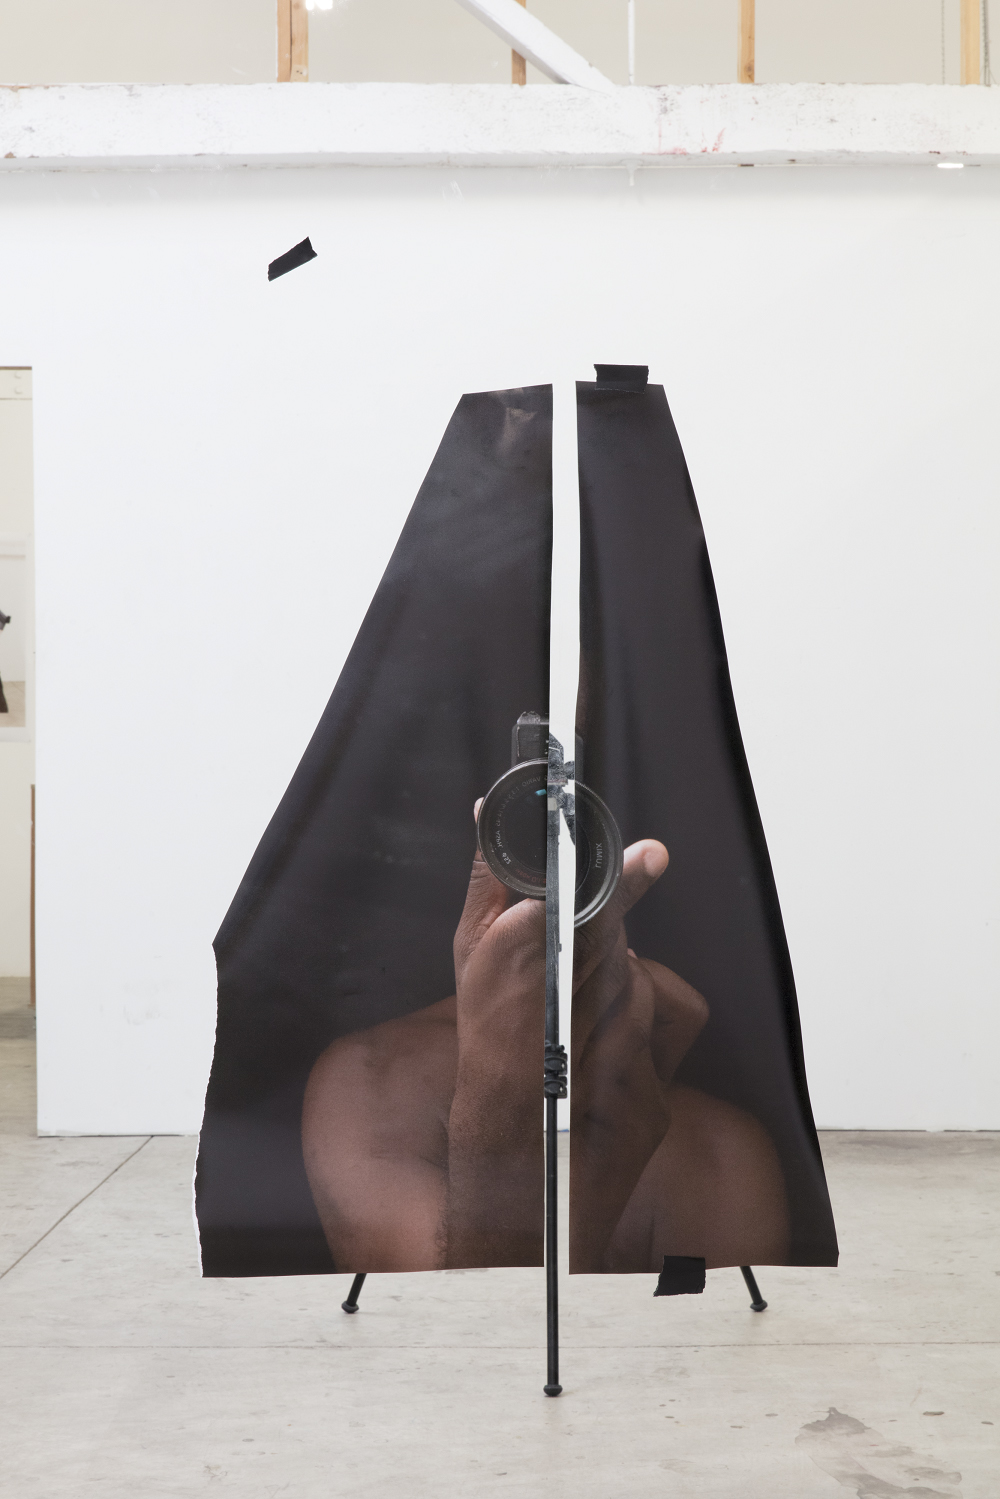 A color photograph shows a large photograph, cut vertically in two, apparently floating in a white-walled studio. The cut image depicts the shoulders and hands of a dark-skinned man, holding a camera. In the space between the two pieces a camera tripod can be seen.